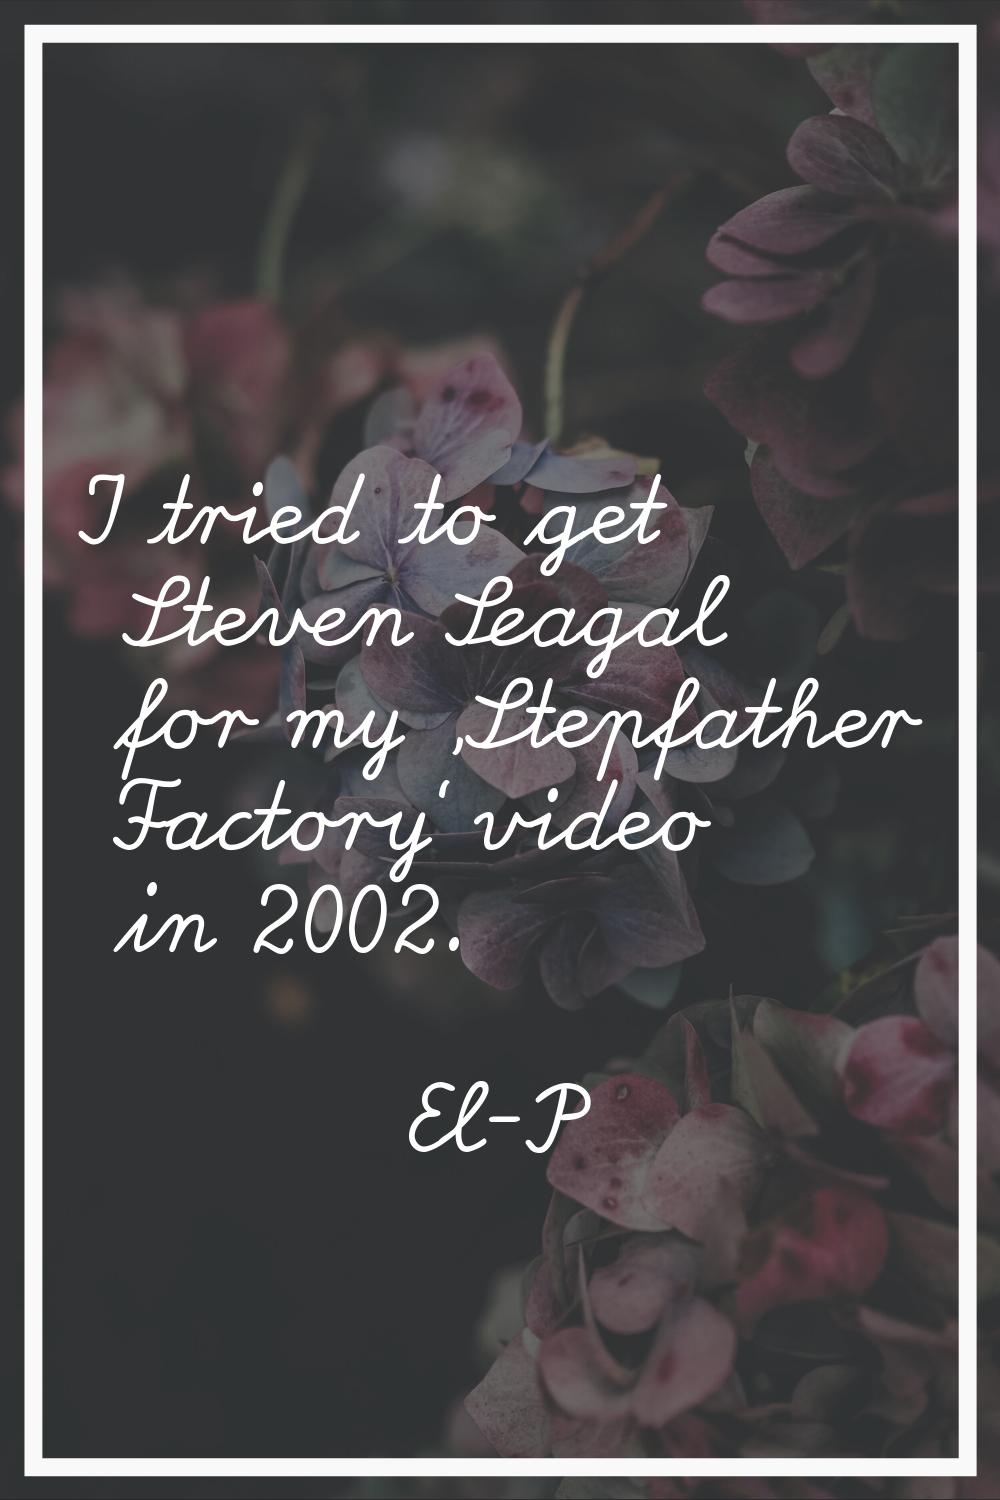 I tried to get Steven Seagal for my 'Stepfather Factory' video in 2002.